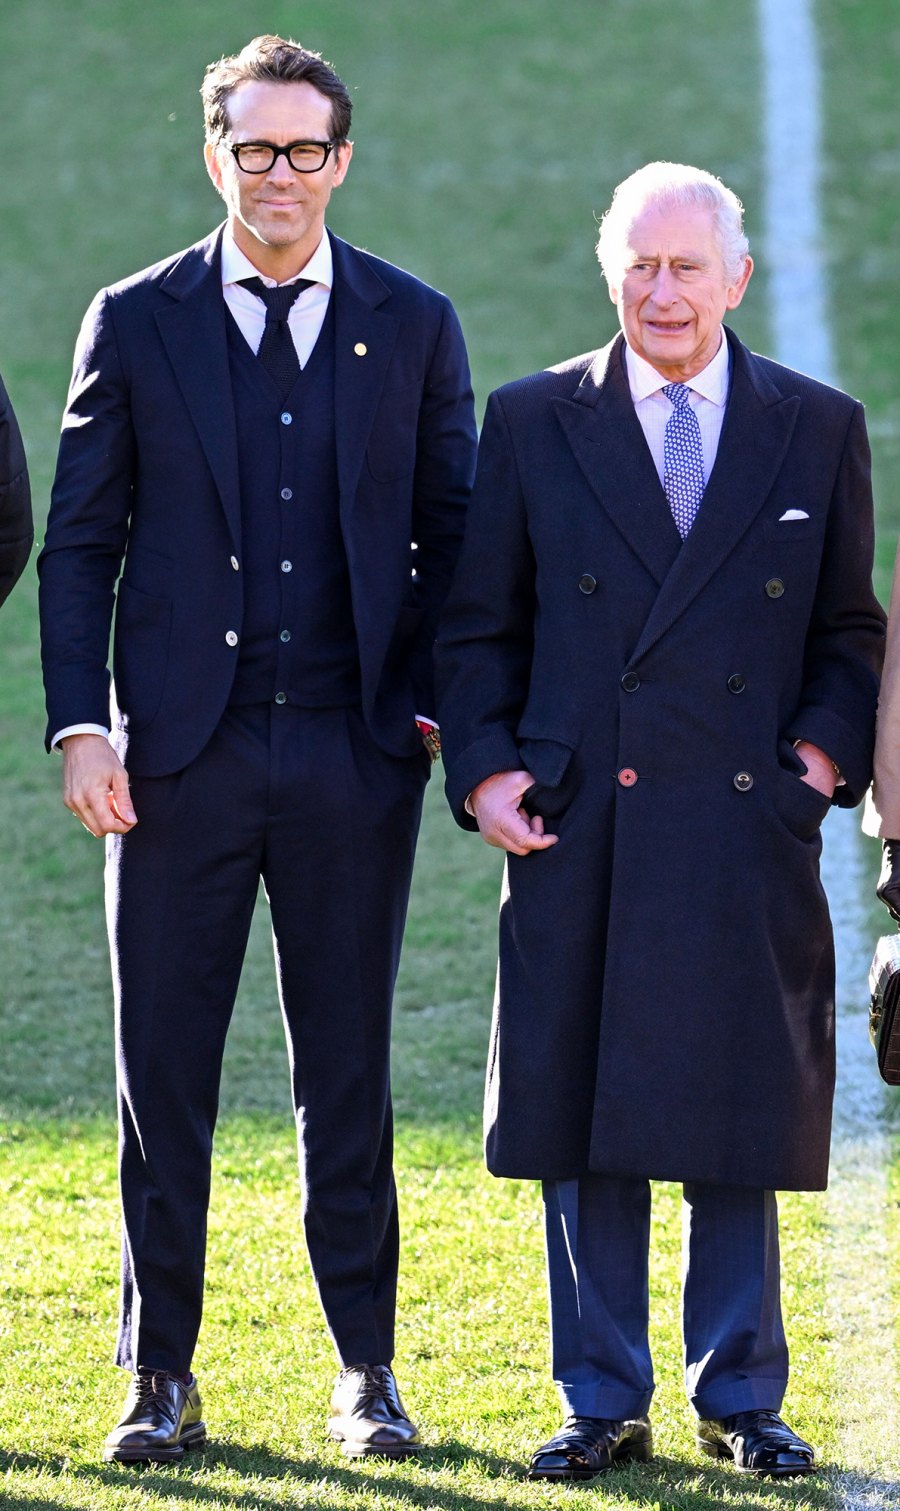 Smiling Ryan Reynolds in a Black Suit next to King Charles III in a coat on a soccer field Hotness Evolution